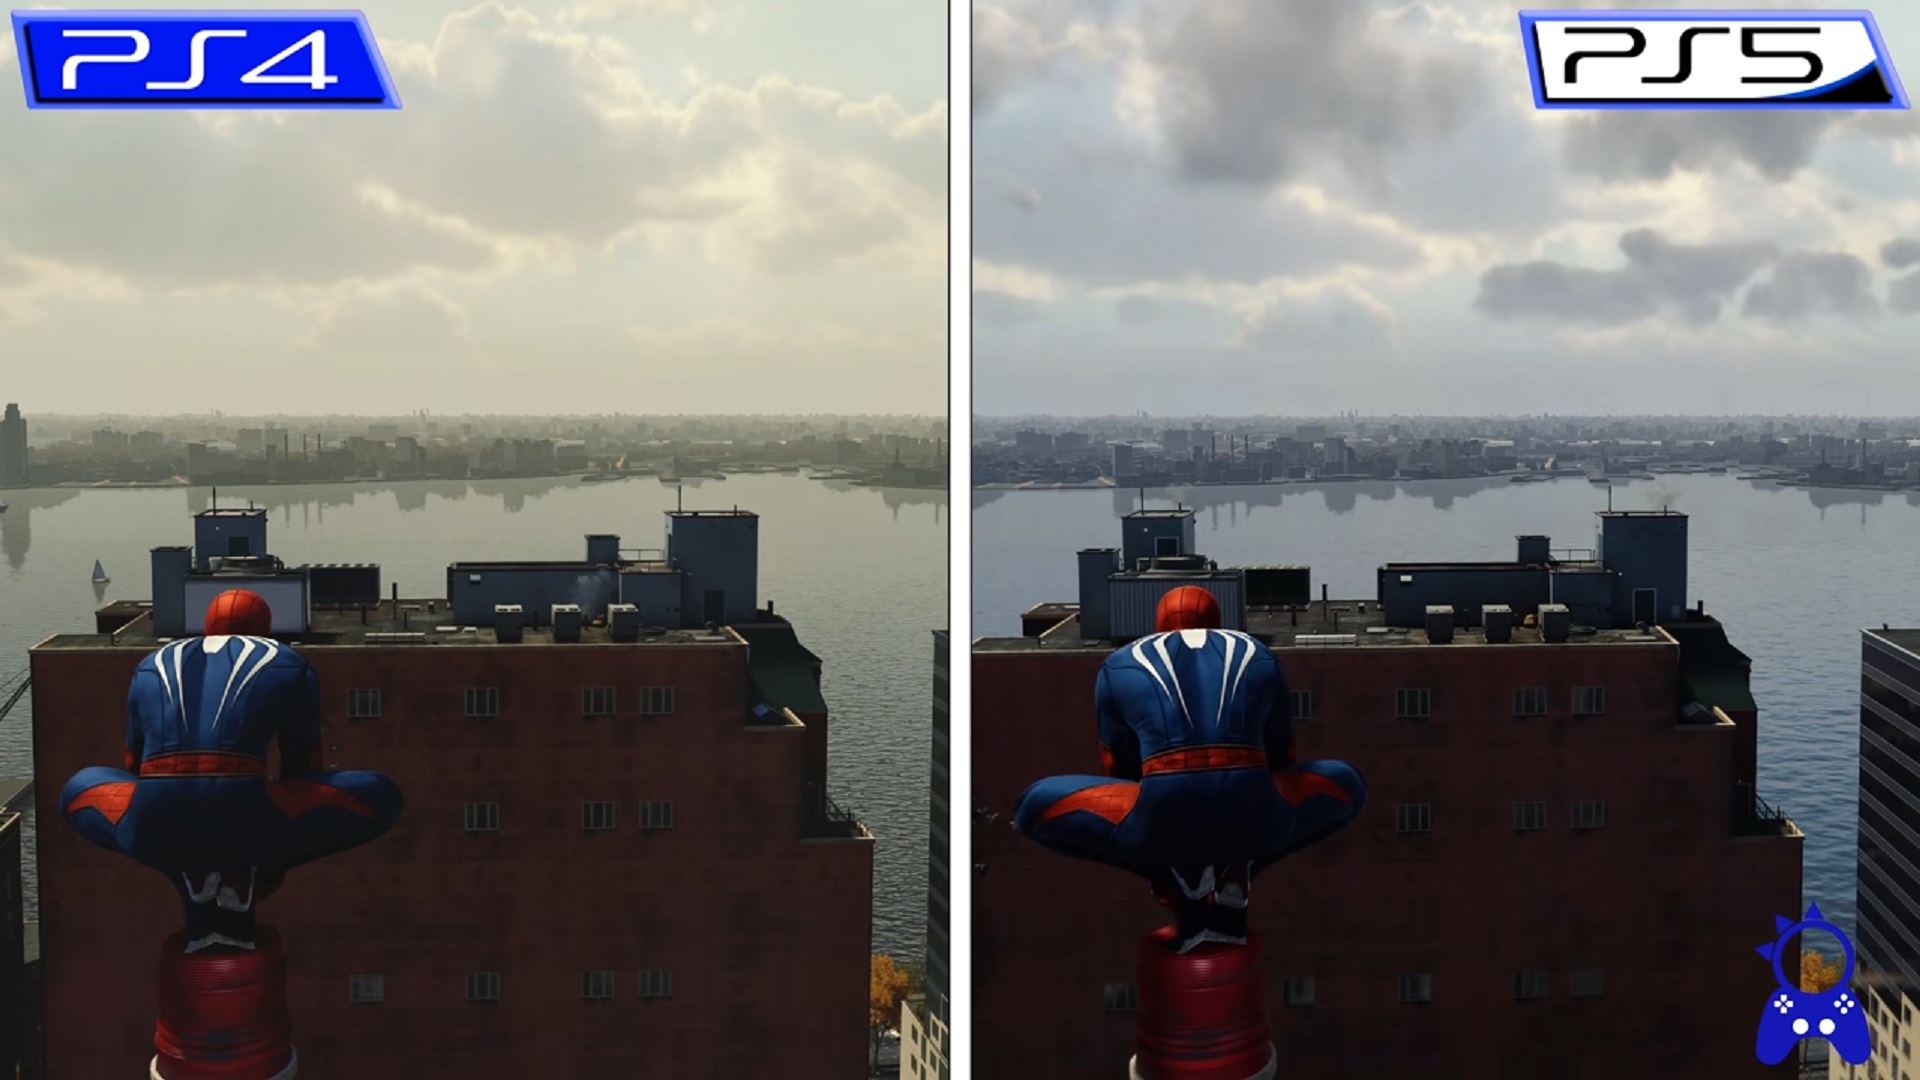 spider man ps4 on ps5